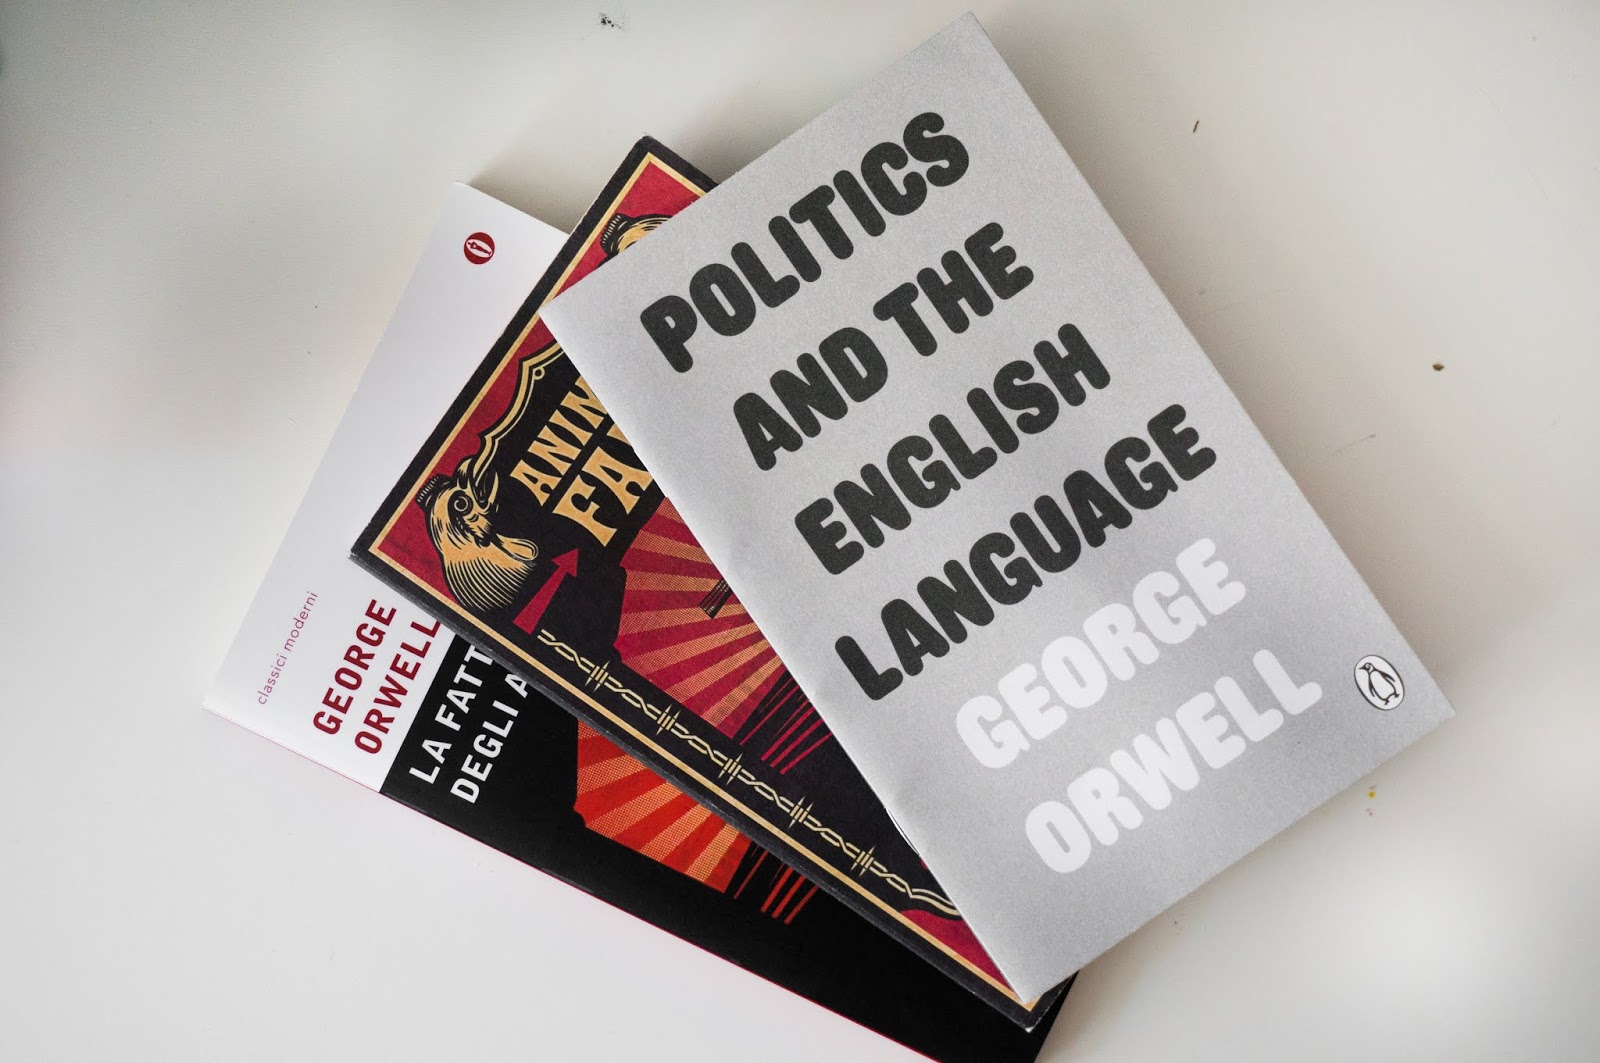 what is the thesis of george orwell's politics and the english language